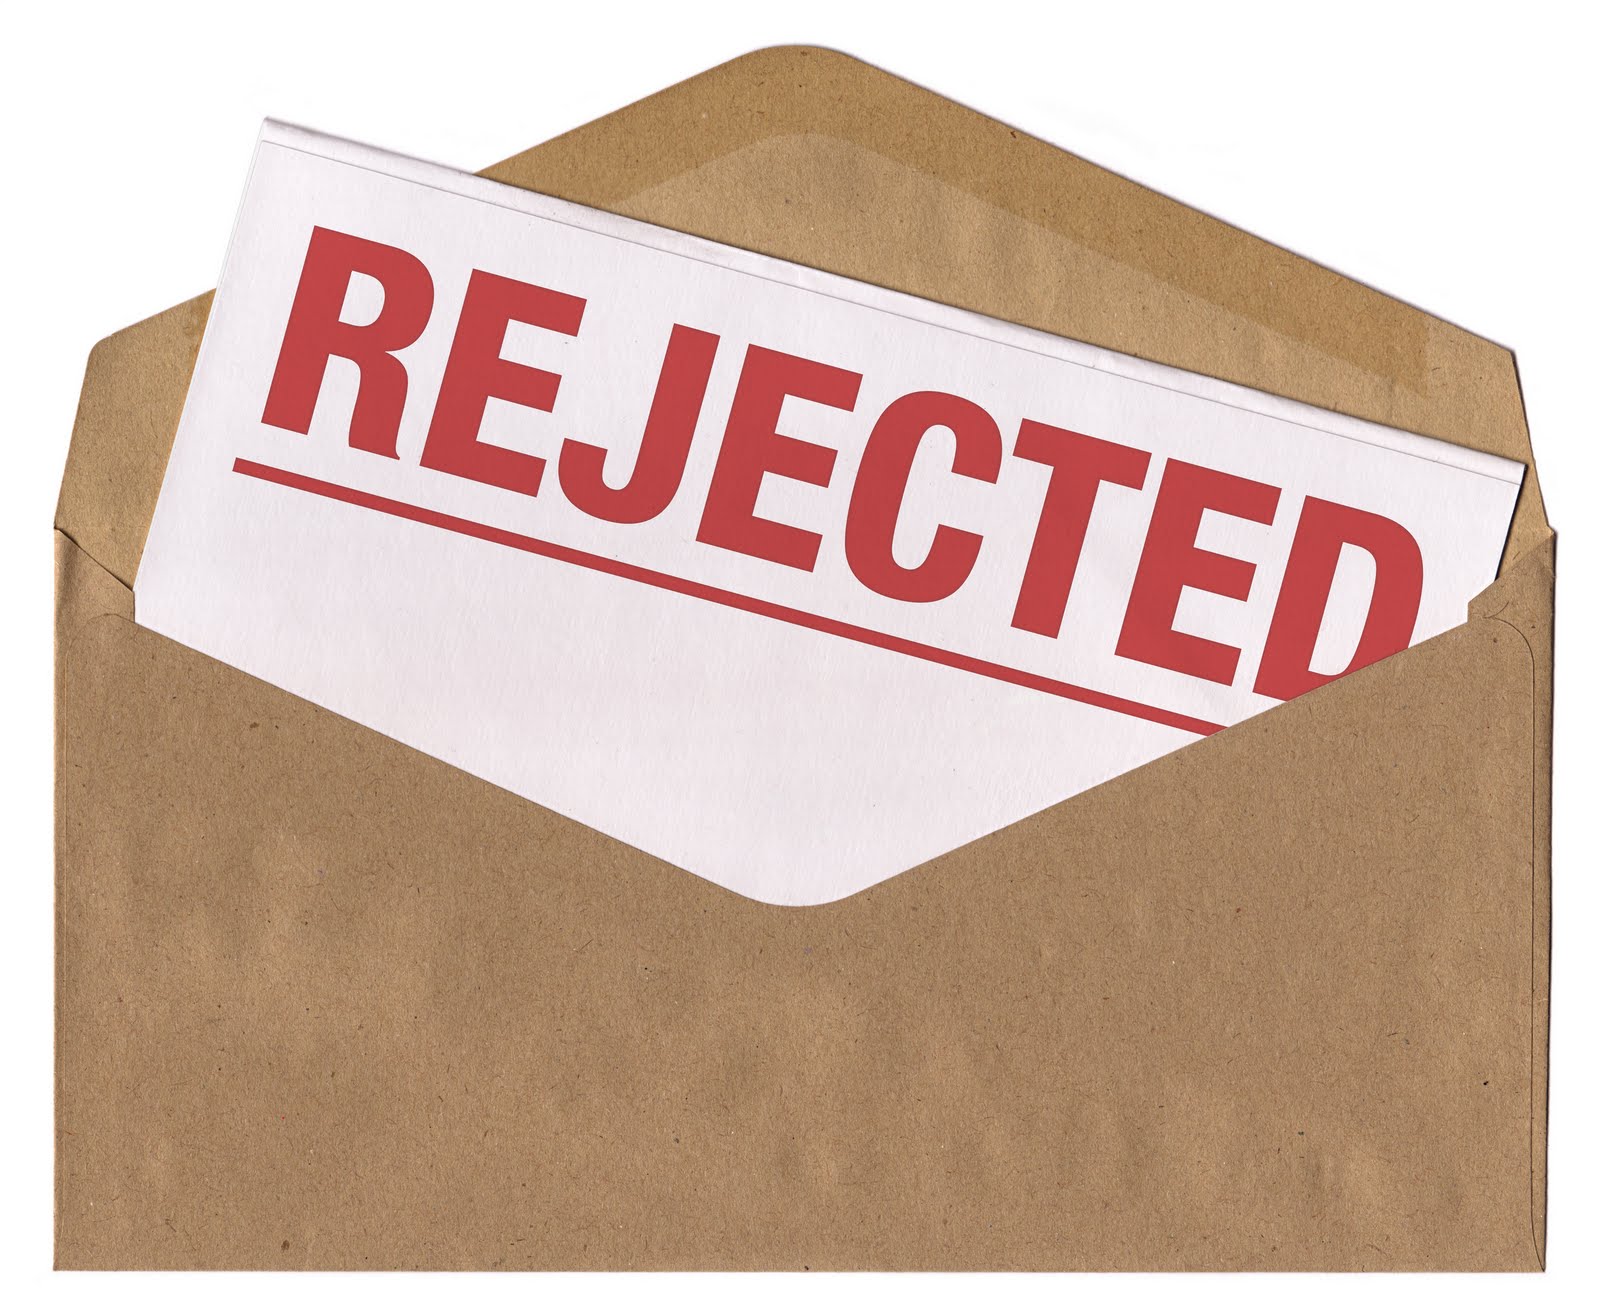 What's in the envelope? REJECTION! 